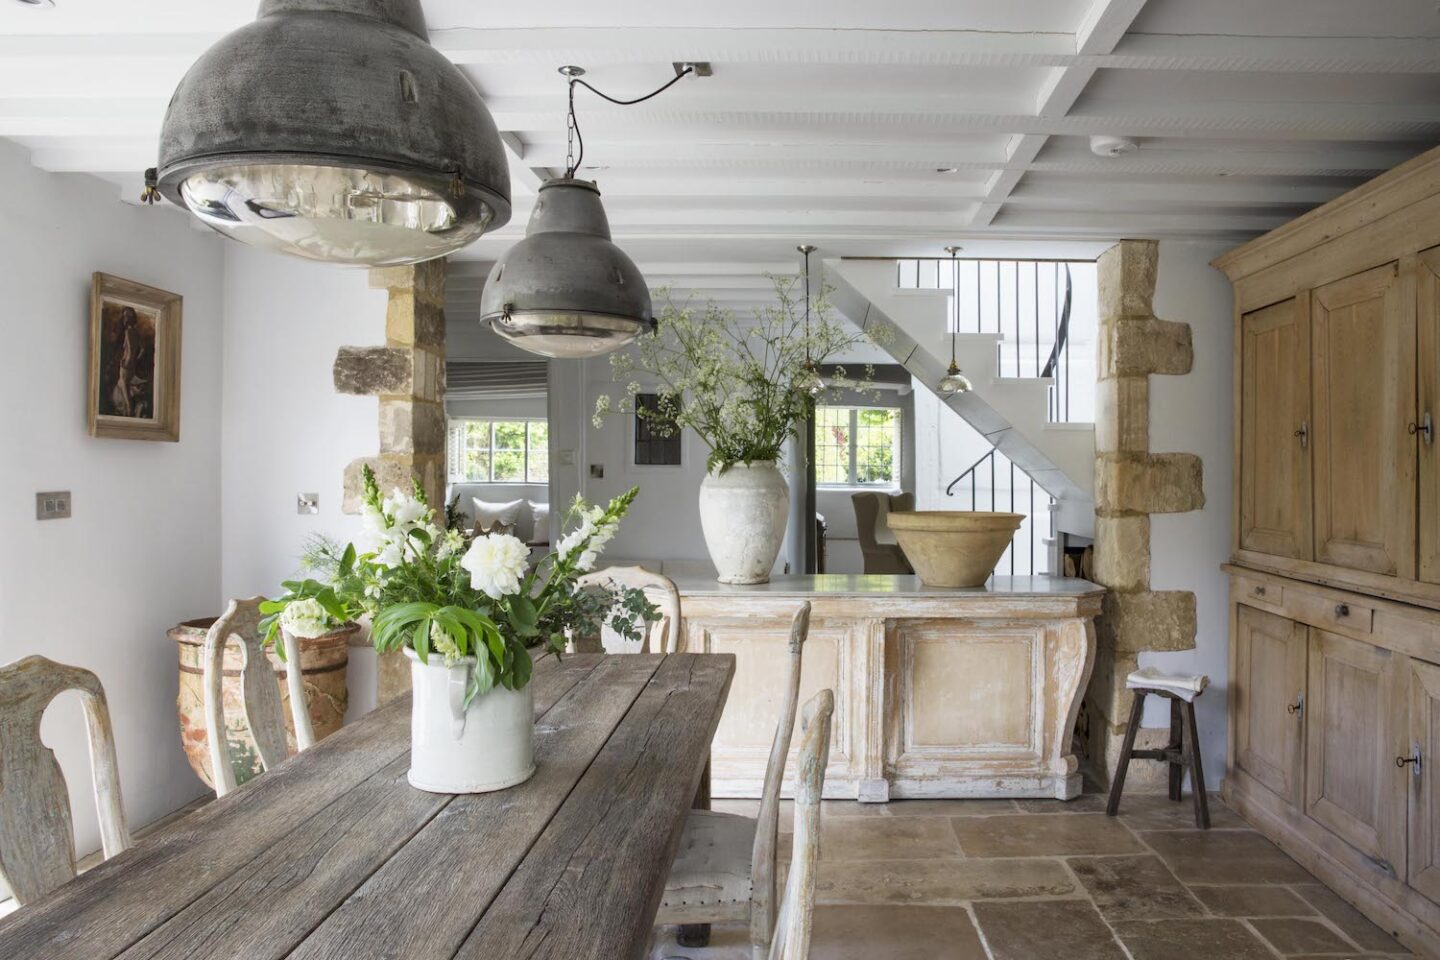 French and Swedish antiques in a Cotswolds cottage by Anton & K. #englishcottage #europeancountry #countrykitchen